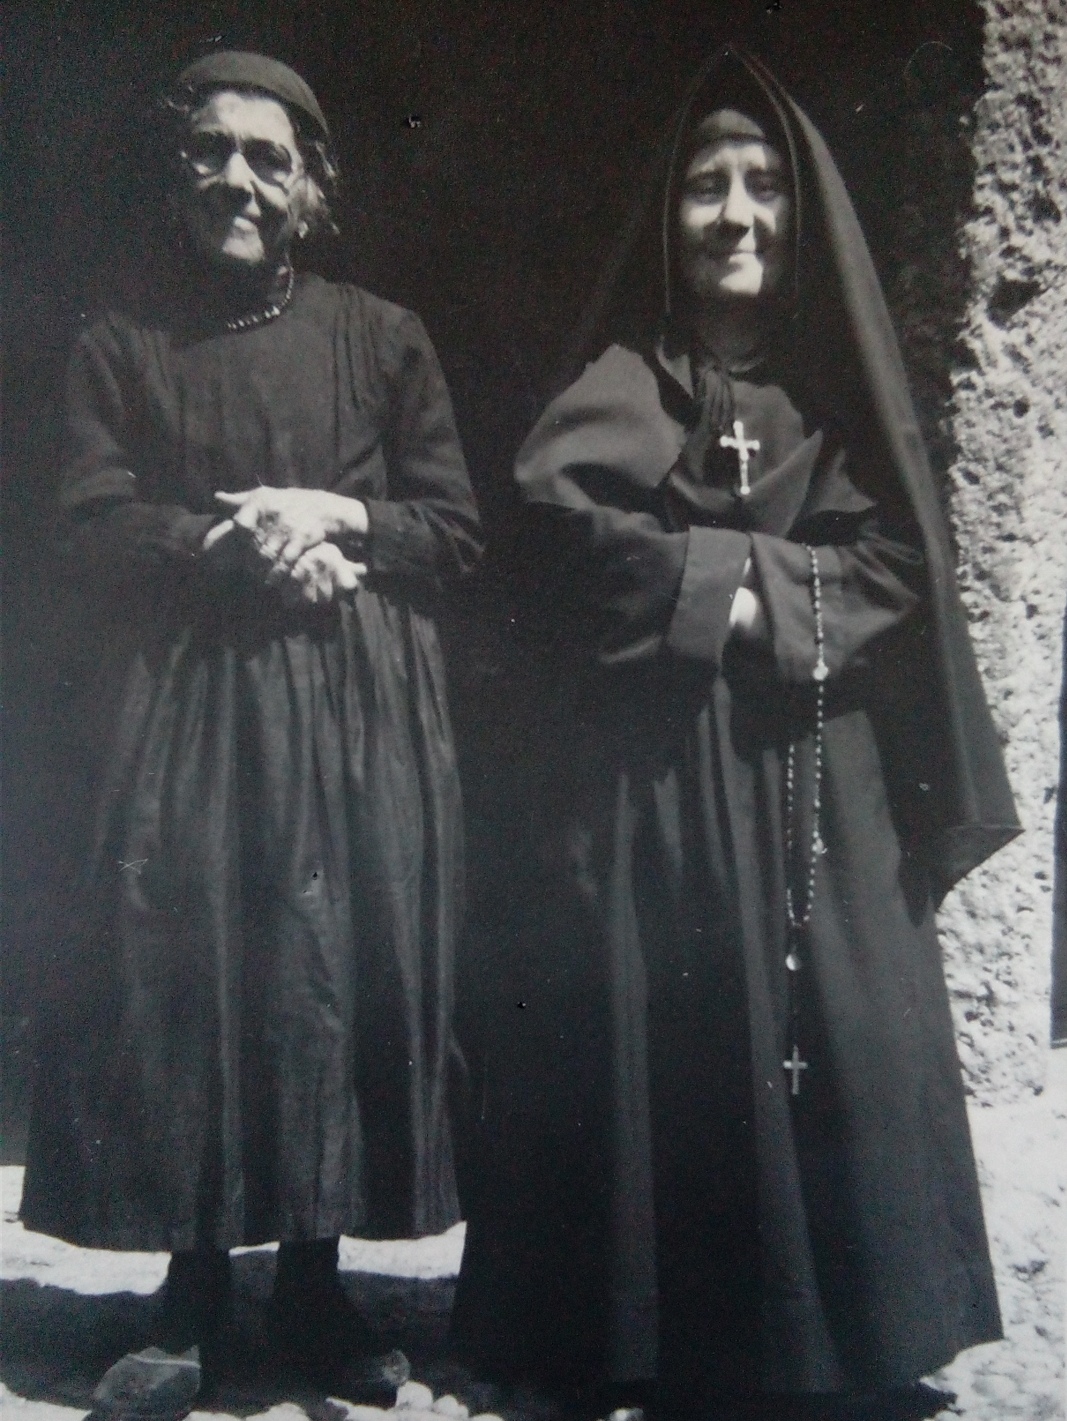 My great-grandmother is her sister who is a nun...